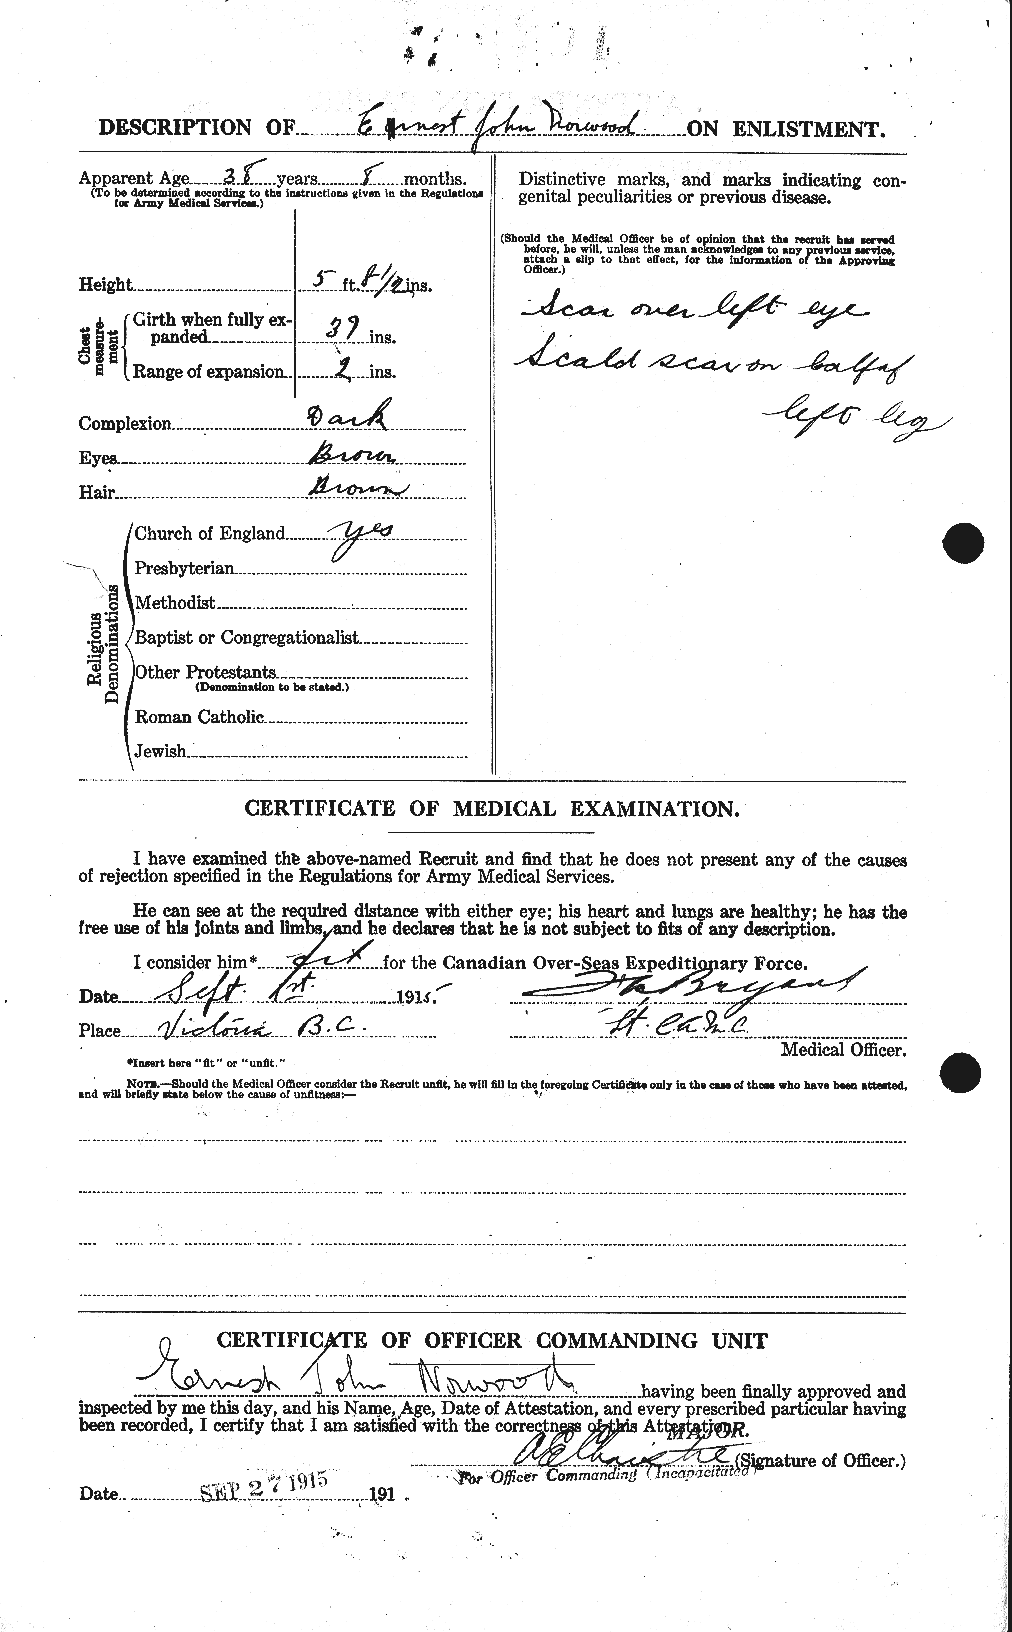 Personnel Records of the First World War - CEF 551921b